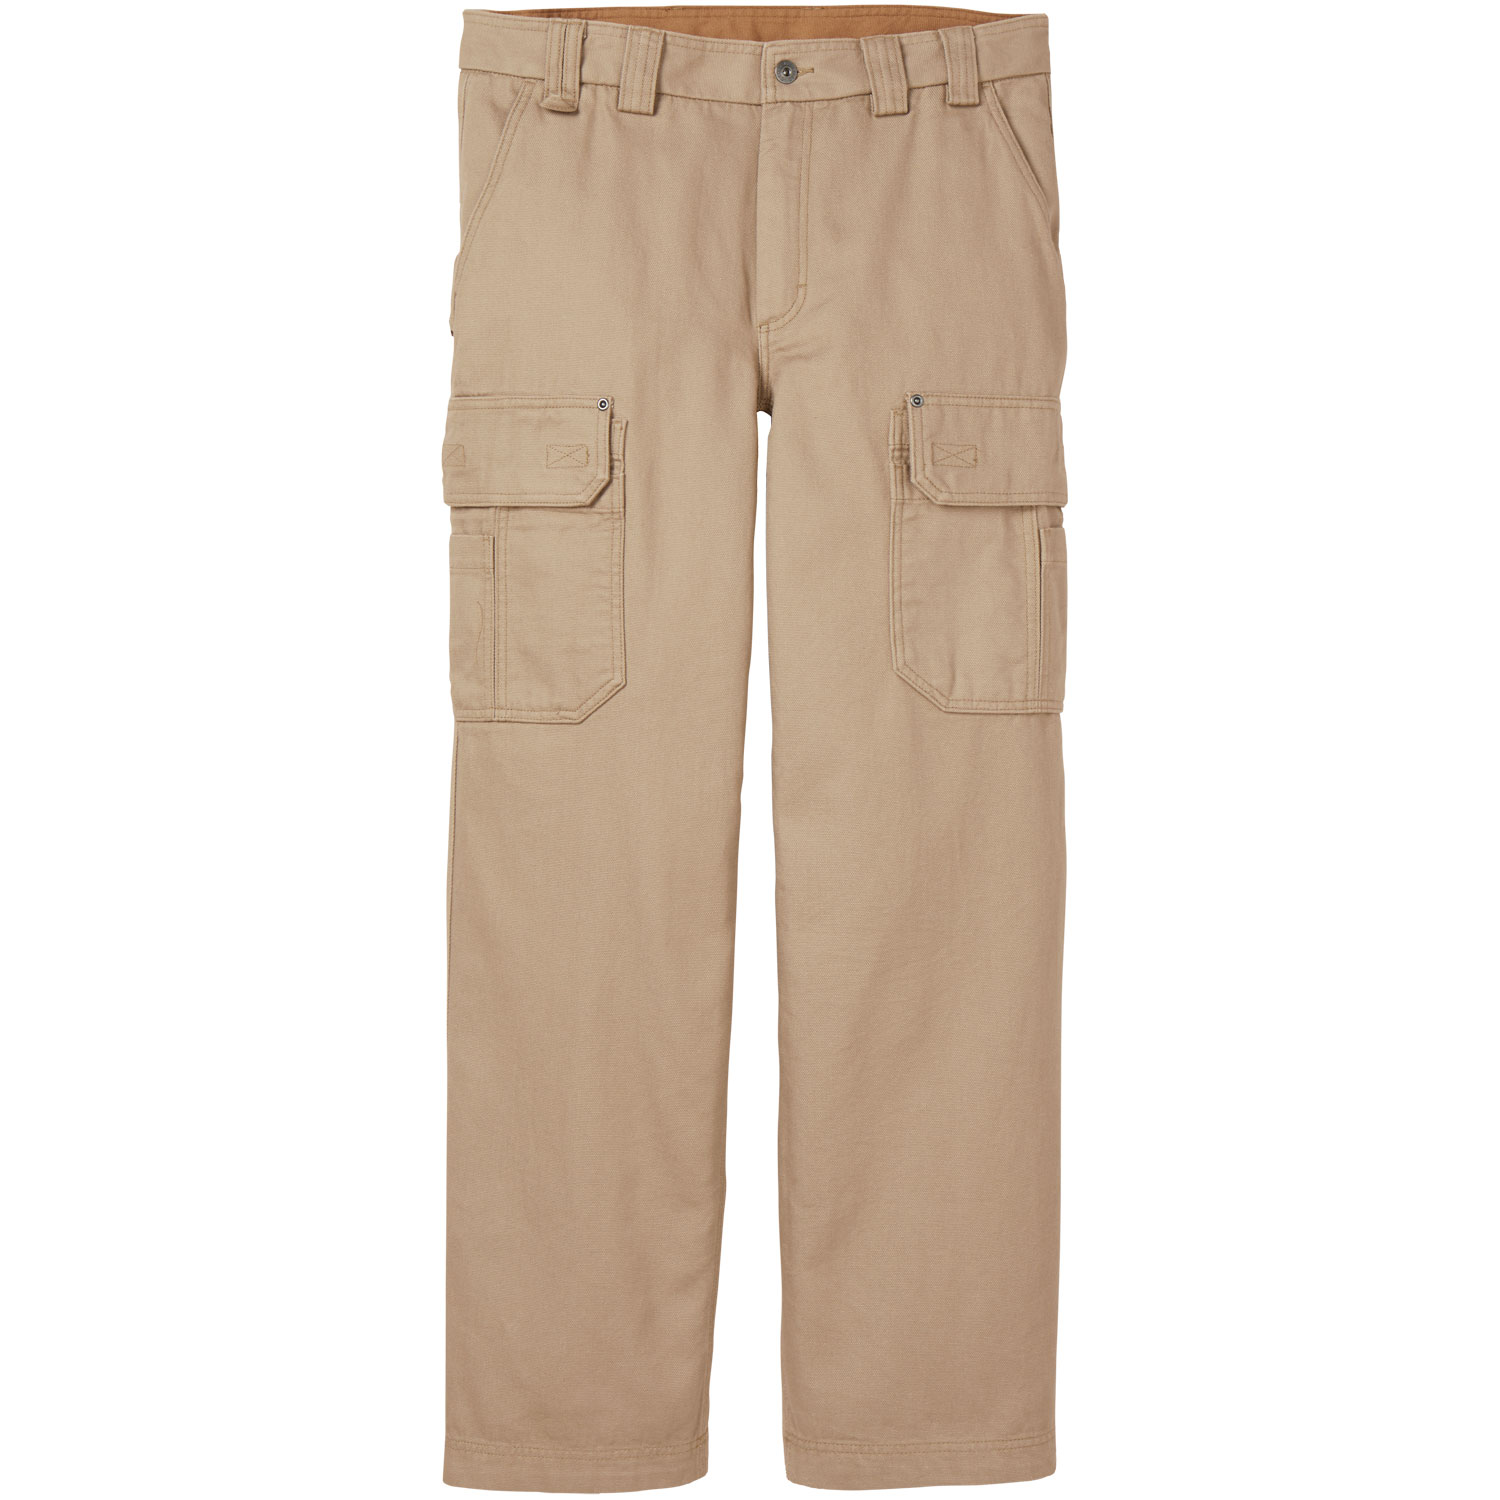 Duluth Trading Fire Hose Cargo Pants Fleece Lined 36x30 Relaxed Fit Brown  Clean